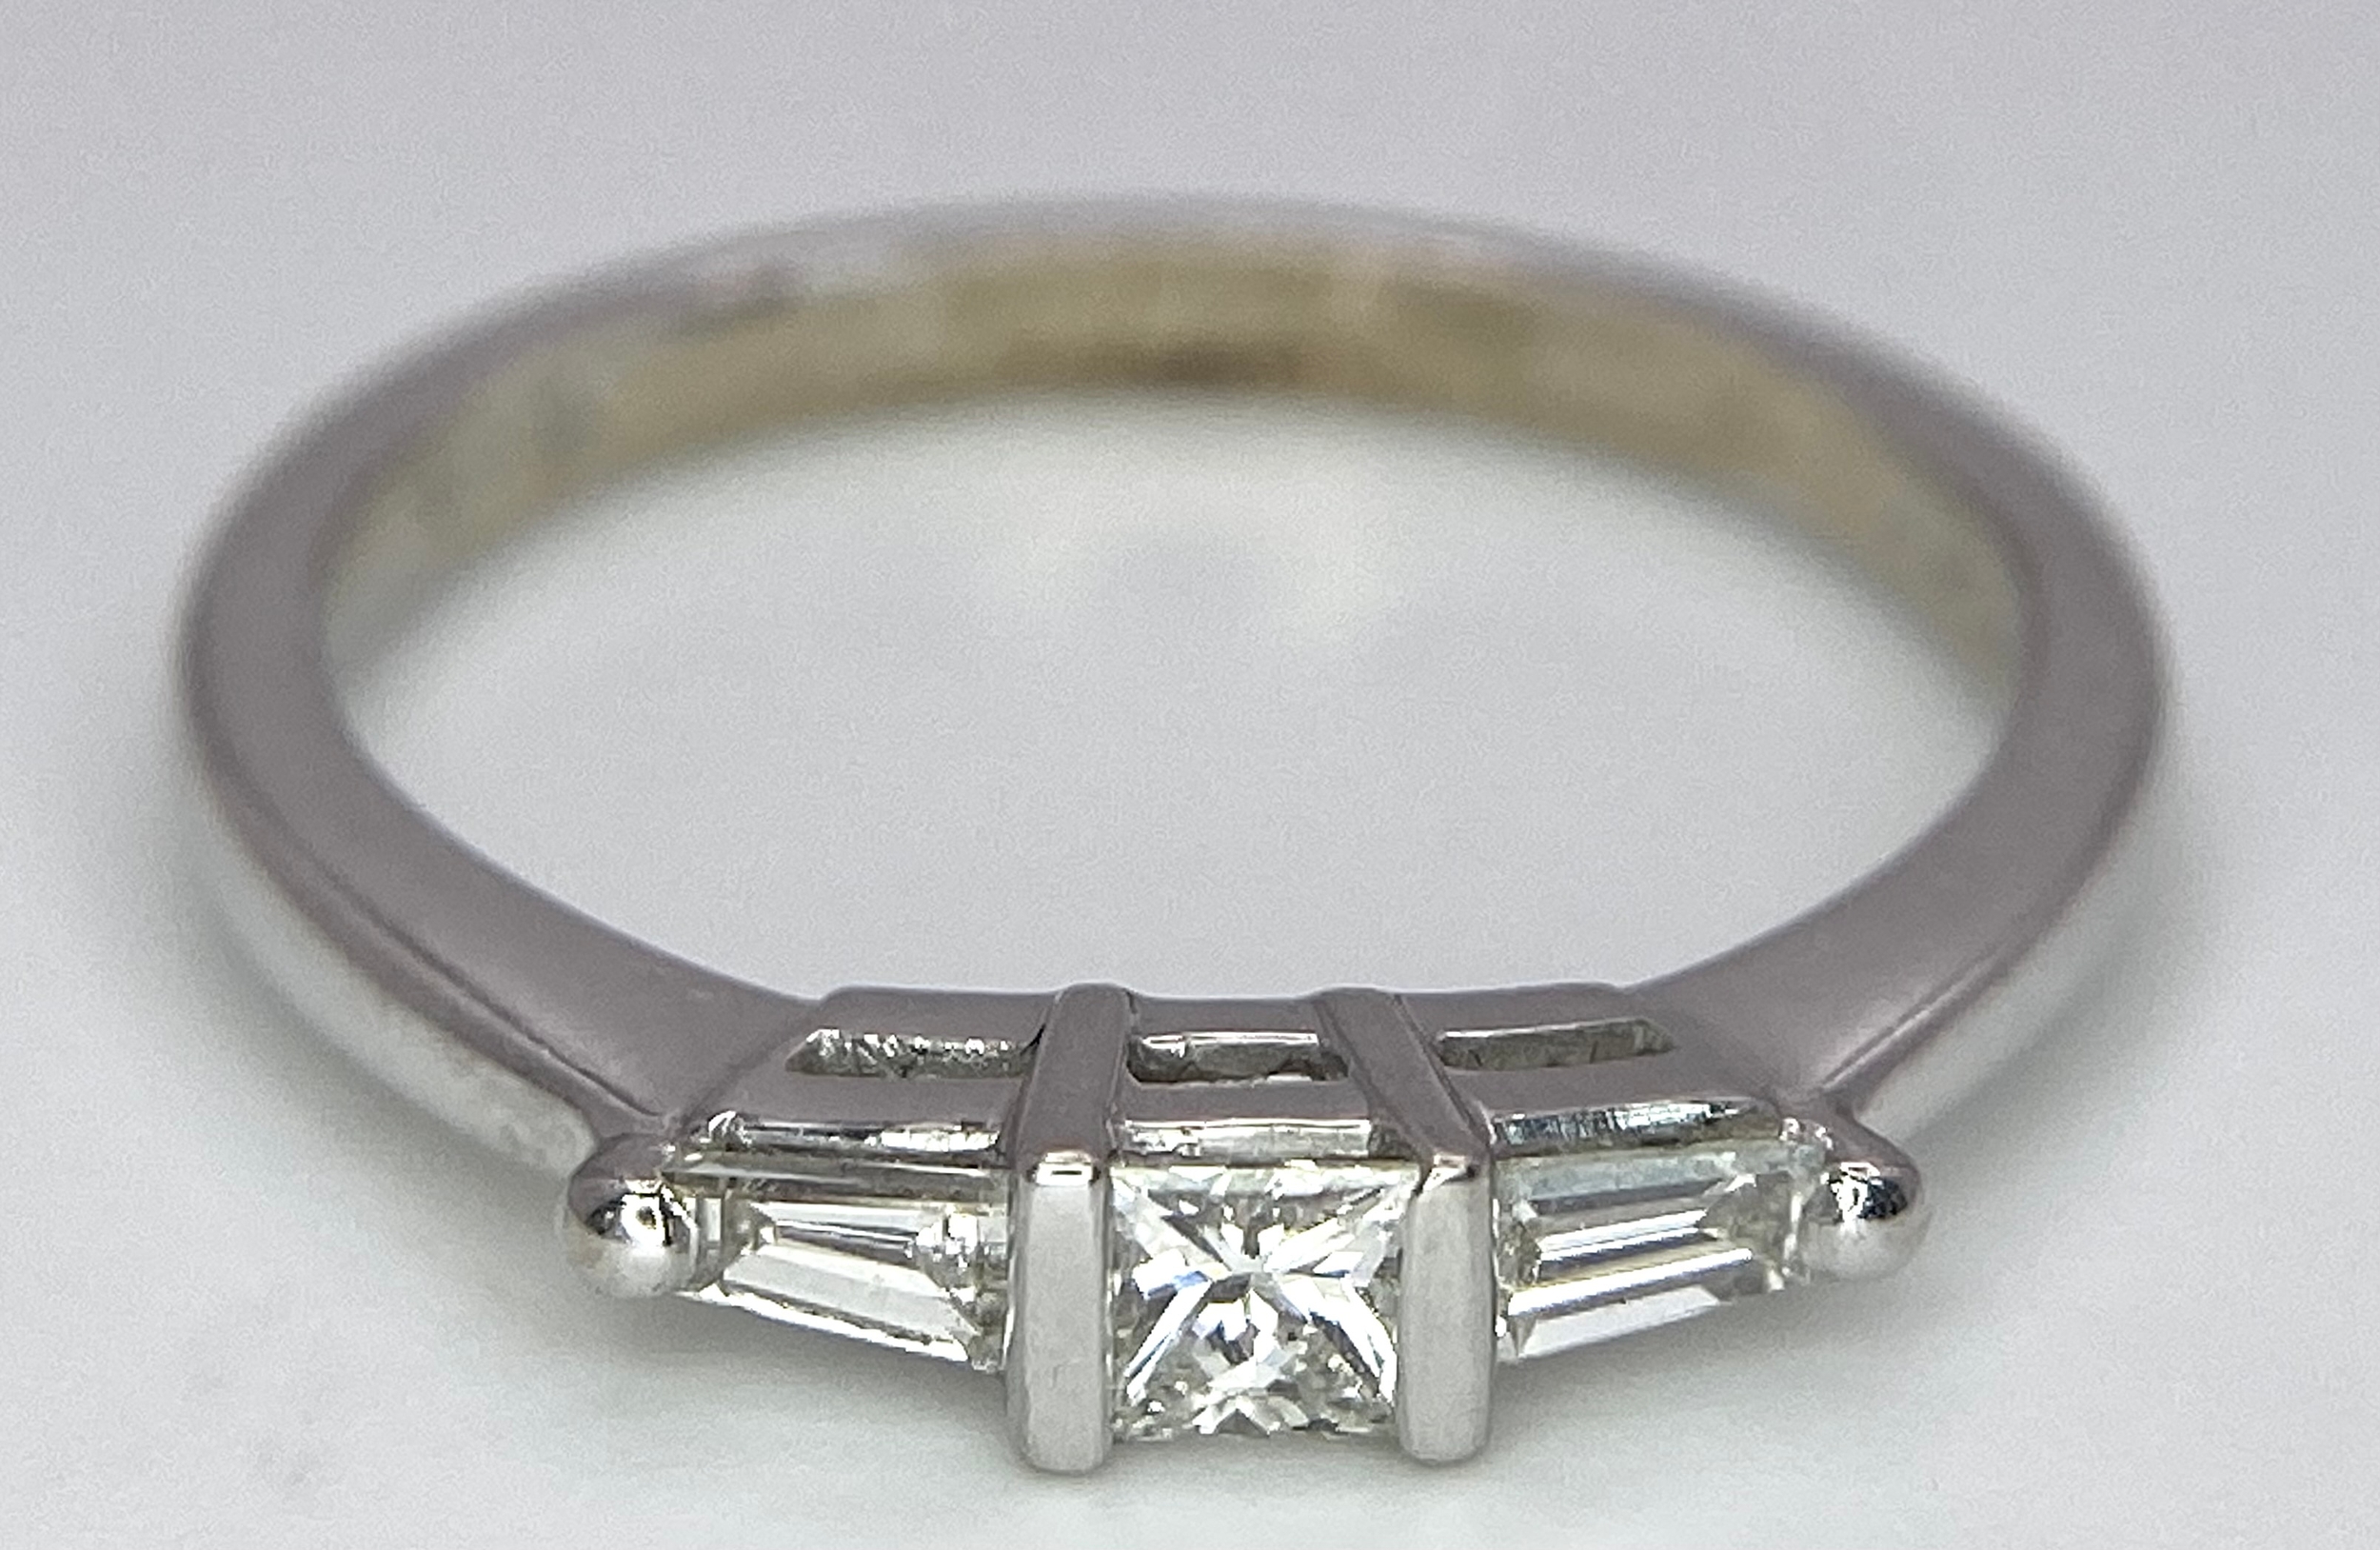 AN 18K WHITE GOLD, DIAMOND 3 STONE RING - PRINCESS CUT CENTRE WITH A TAPPERED BAGUETTE DIAMOND - Image 3 of 7